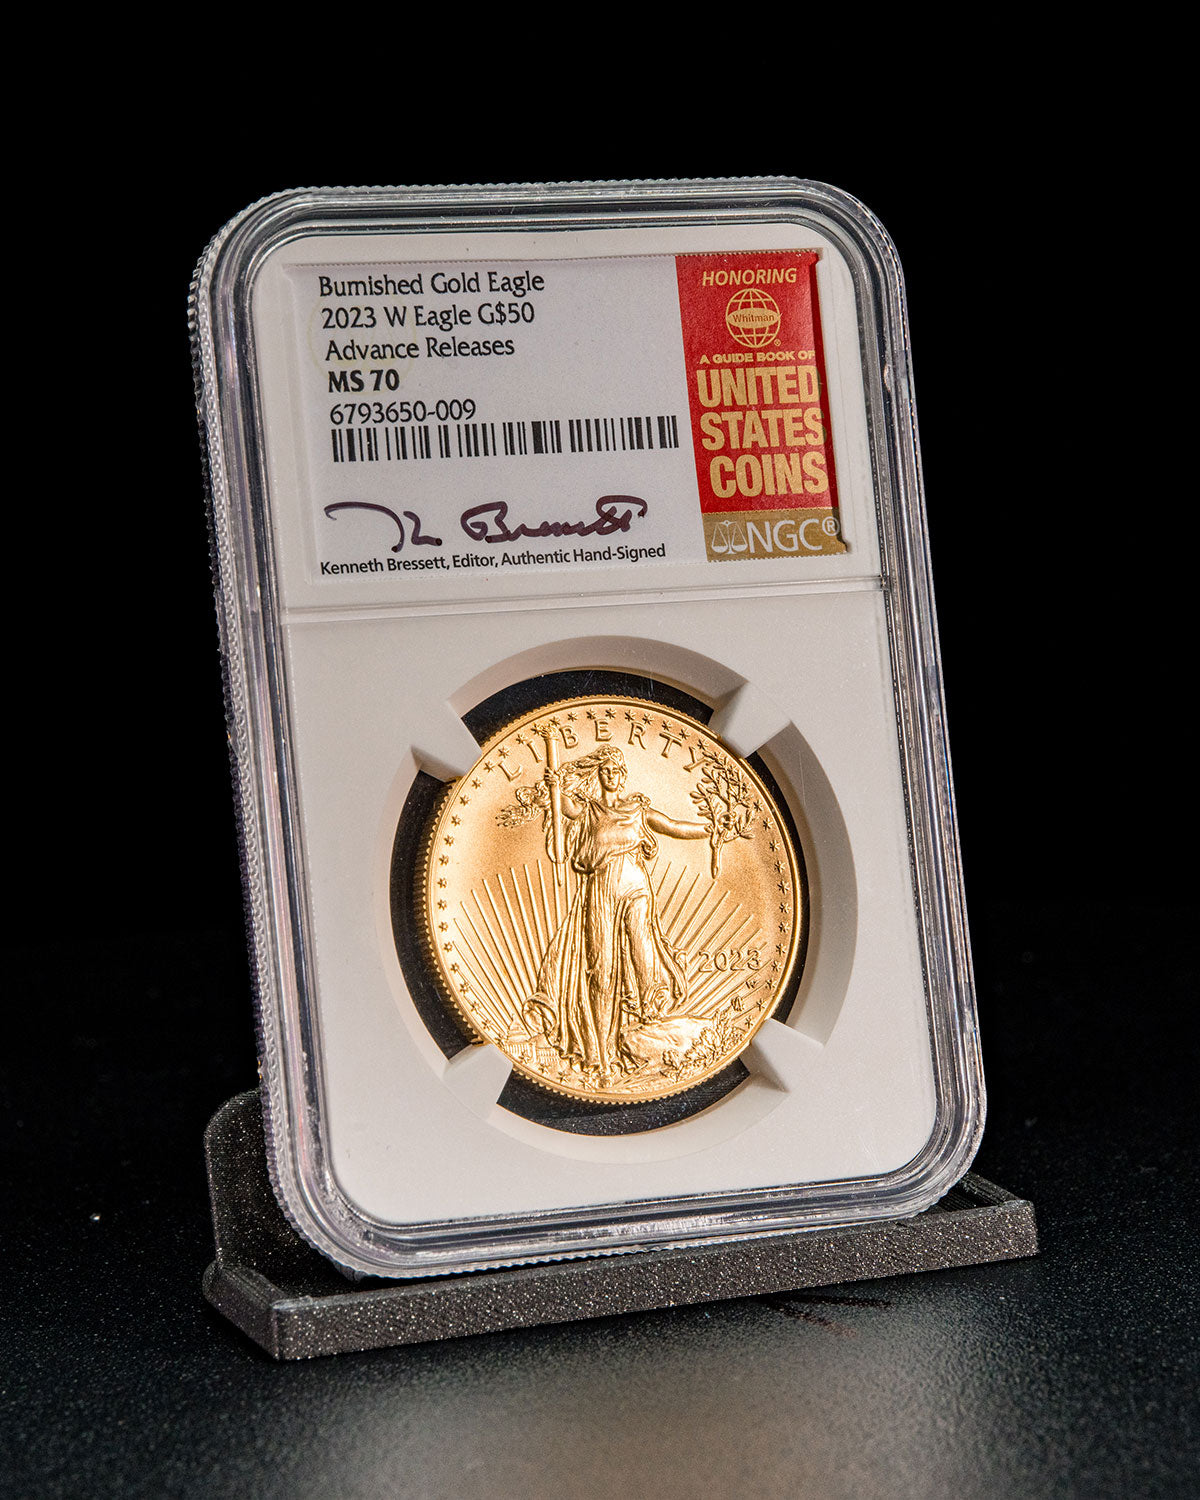 2023 $50 Burnished Gold Eagle | Advance Releases NGC MS70 | Kenneth Bressett Autographed